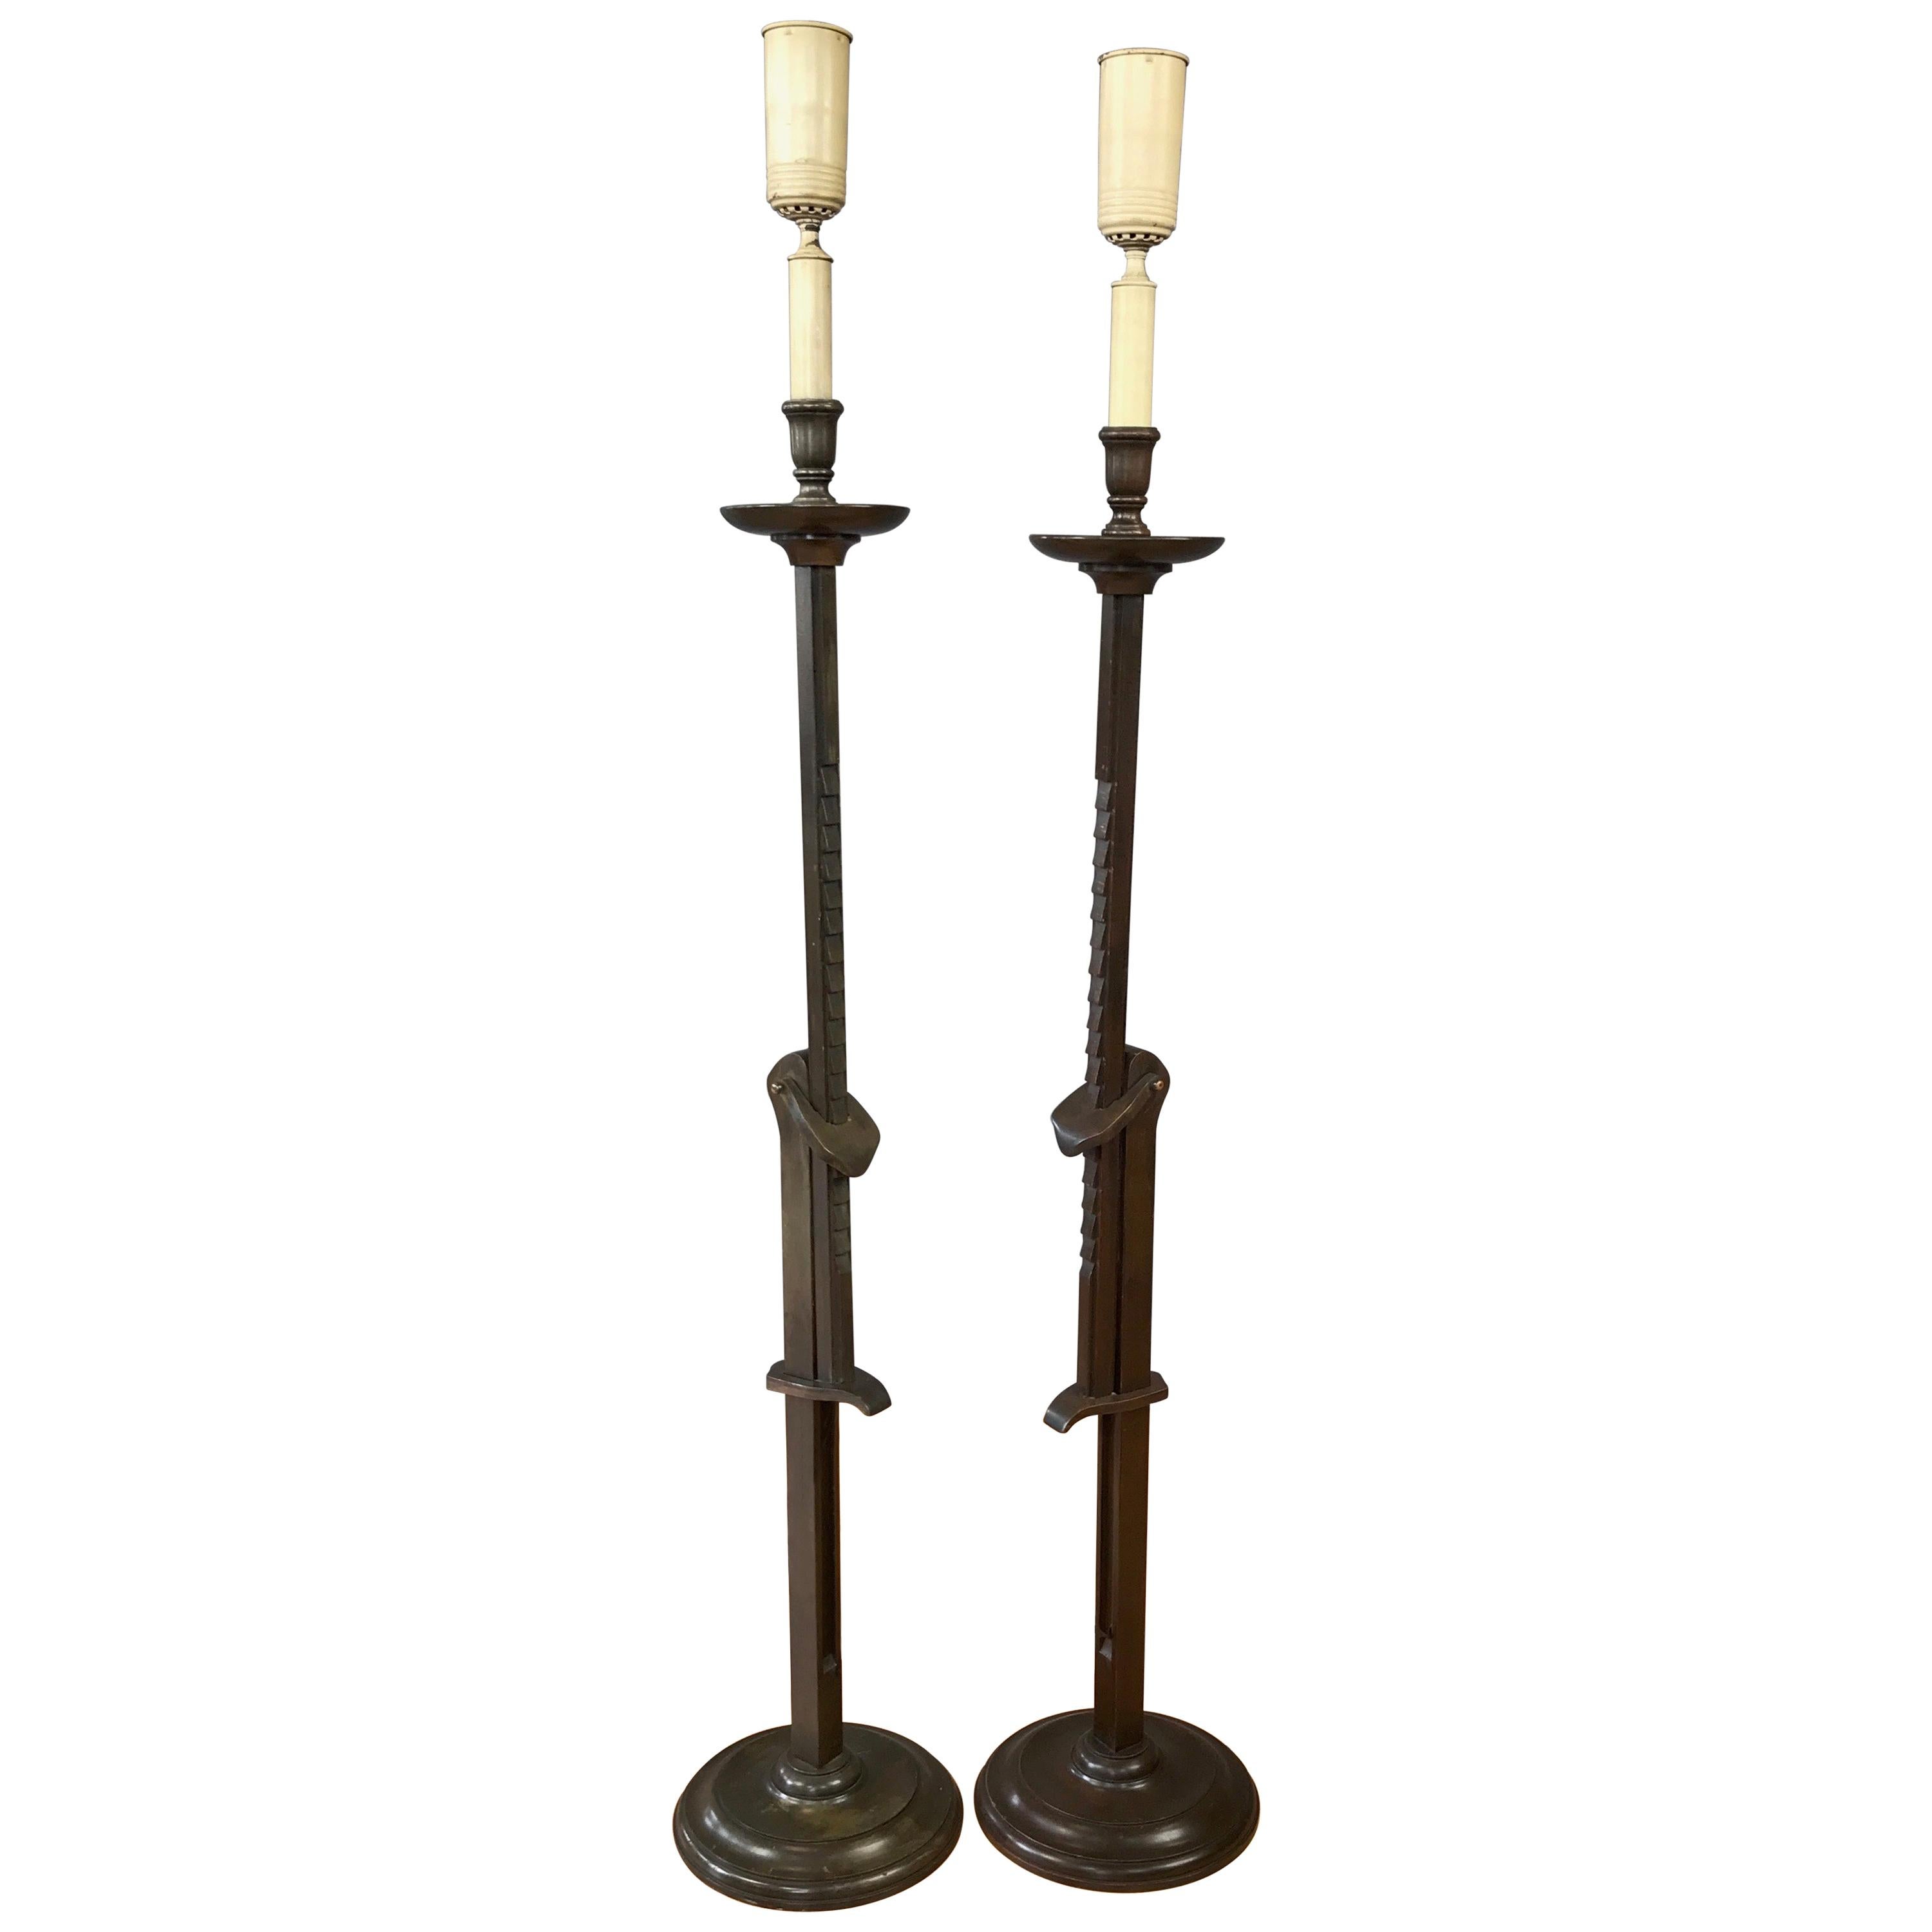 Pair of Frances Elkins Ratcheted Adjustable Height Mahogany Floor Lamps, 1940s